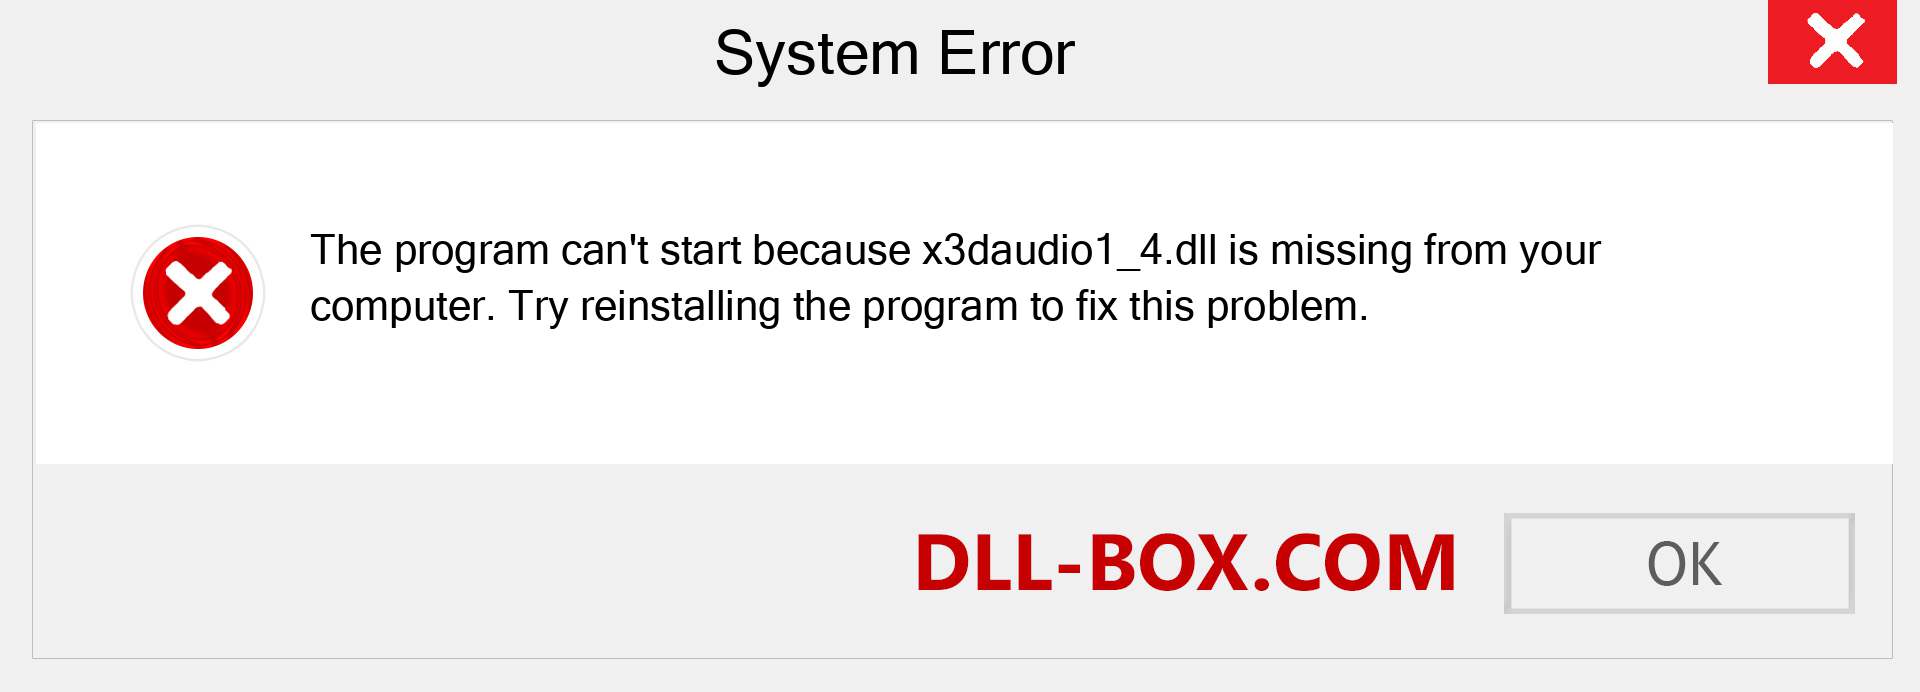  x3daudio1_4.dll file is missing?. Download for Windows 7, 8, 10 - Fix  x3daudio1_4 dll Missing Error on Windows, photos, images